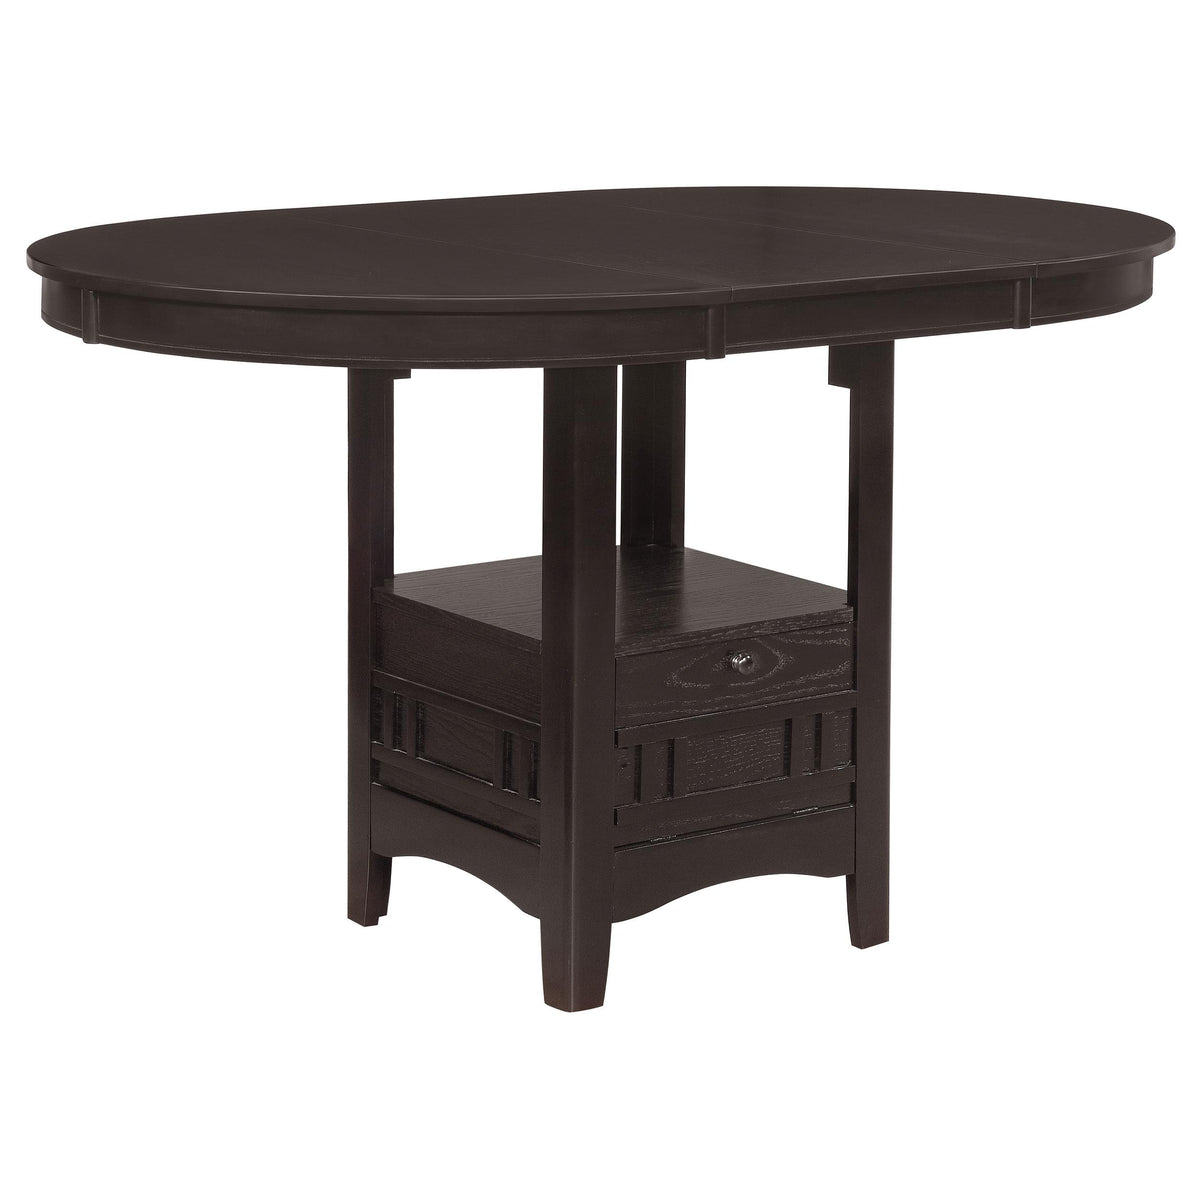 Lavon Oval Counter Height Table Espresso  Las Vegas Furniture Stores